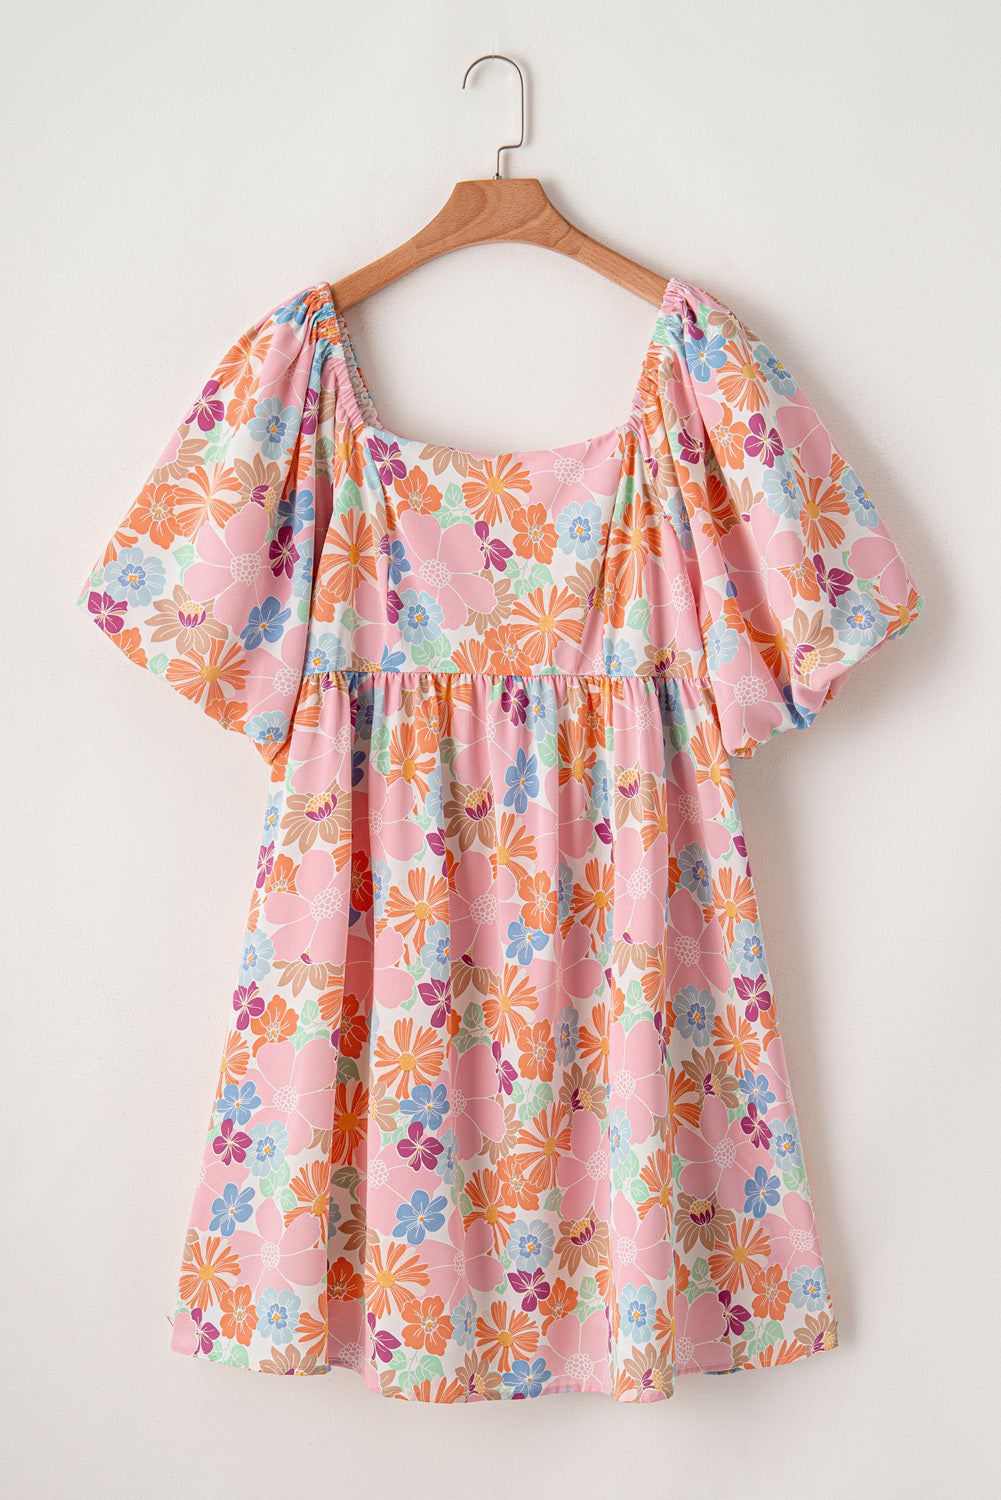 Multicolour Floral Puff Sleeve Square Neck Plus Babydoll Dress